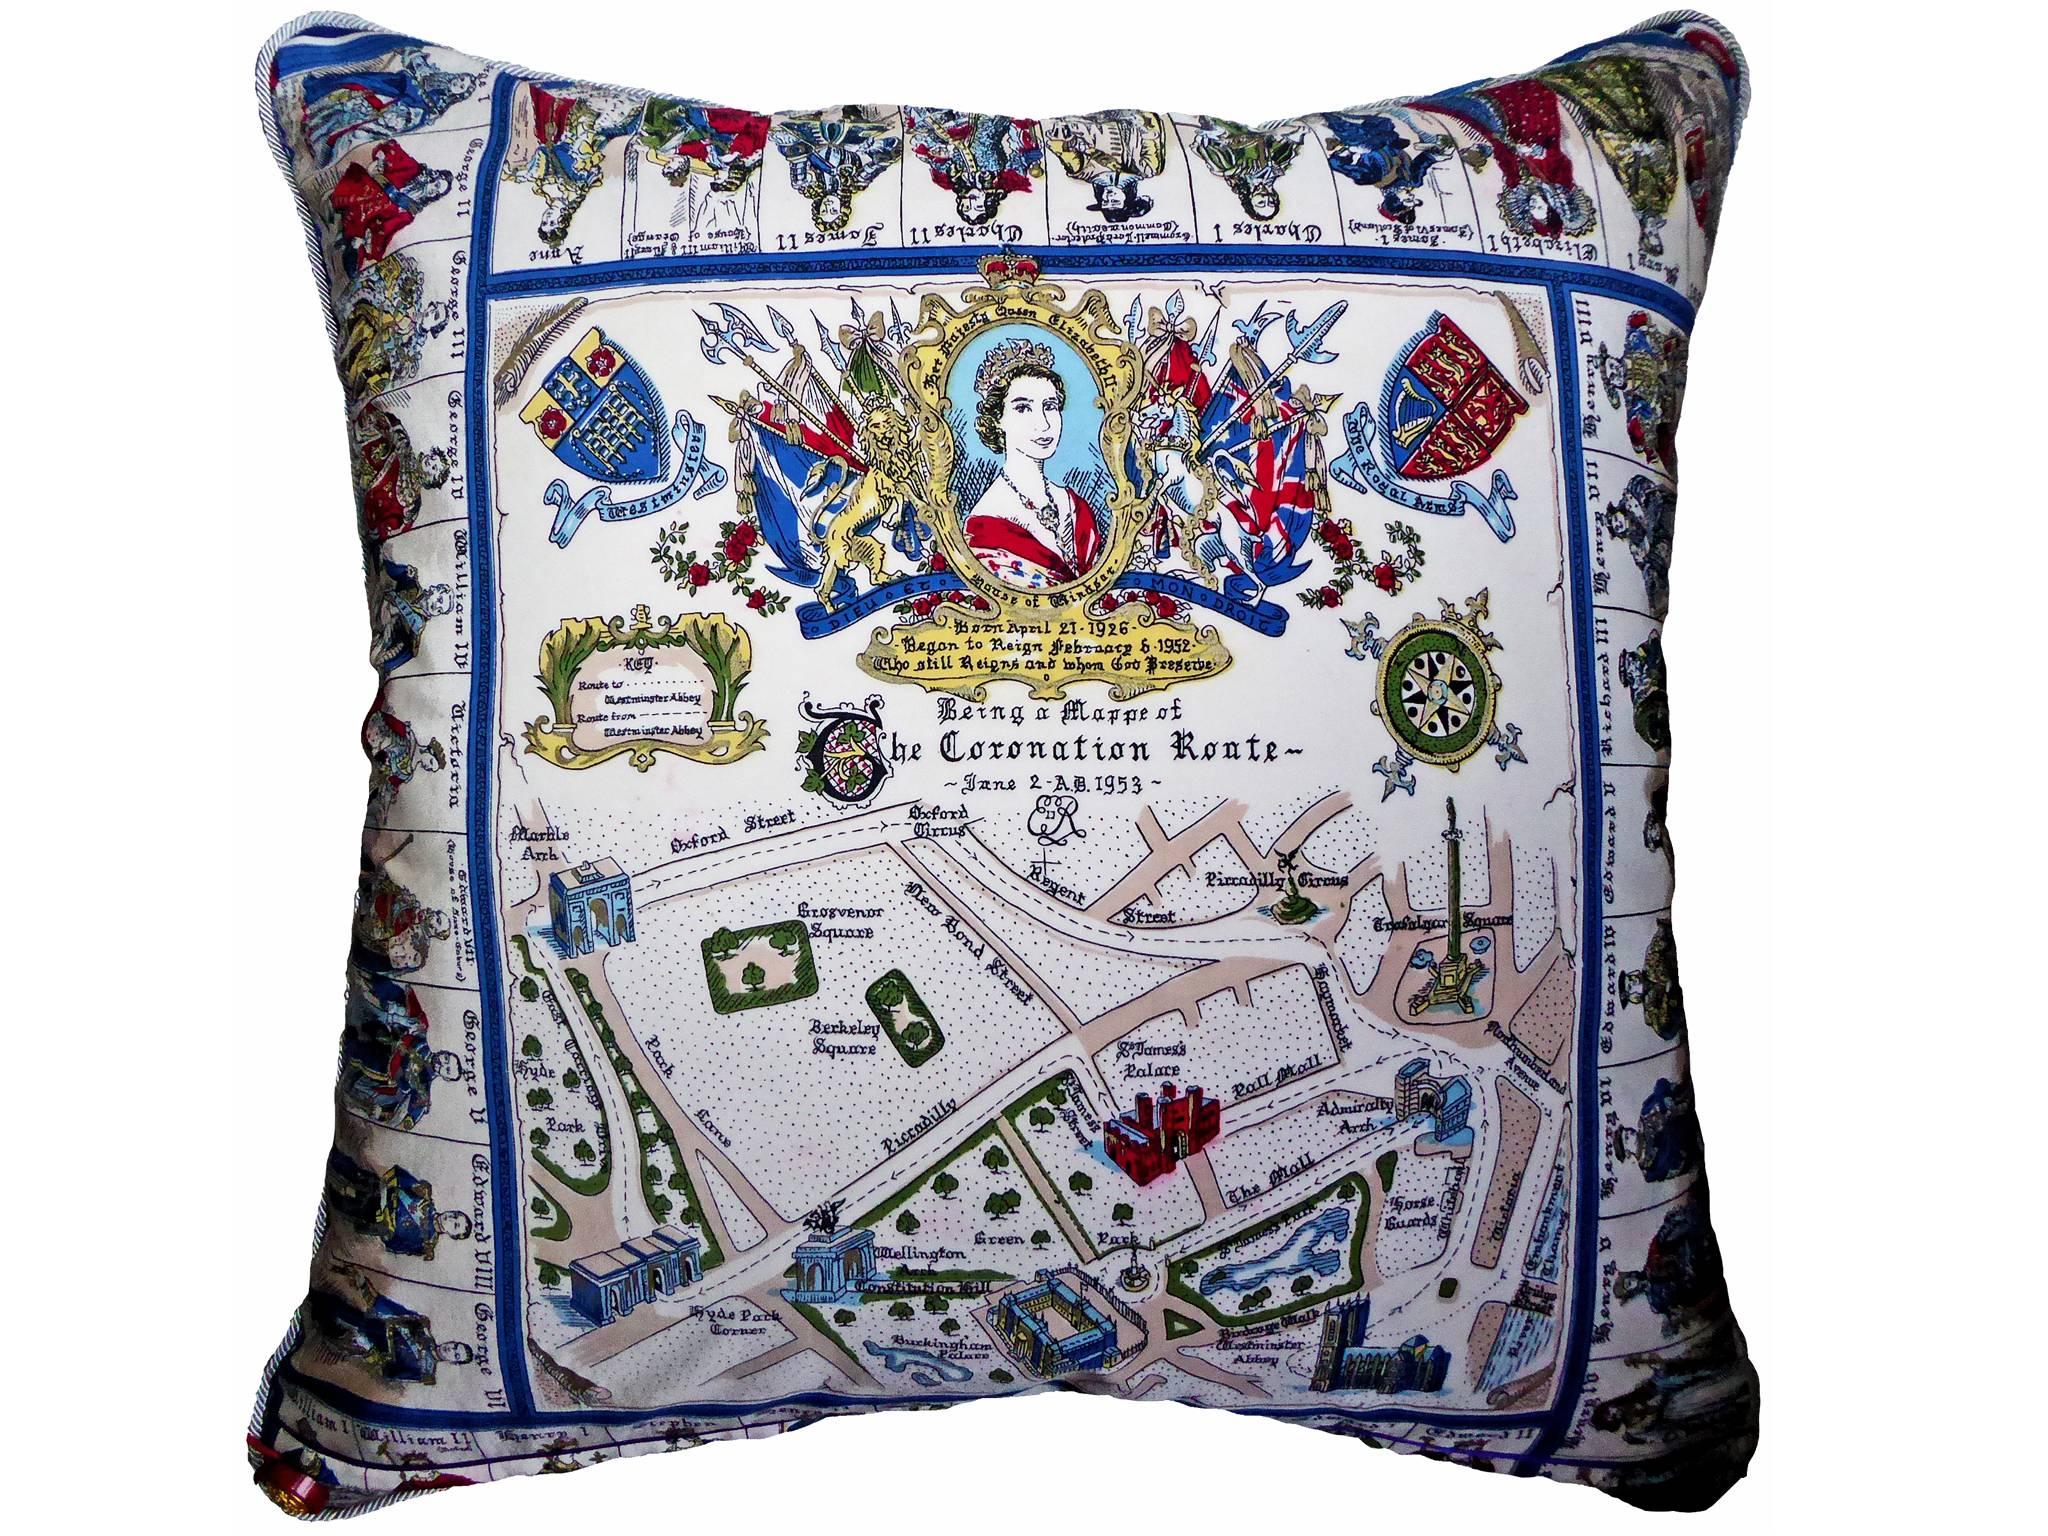 2nd June 1953
Circa - 1950
British made luxury cushion created using original vintage silks. The front side is a very rare Jacqmar silk designed to commemorate the Coronation of Queen Elizabeth in June 1953 and is wonderfully complimented on the